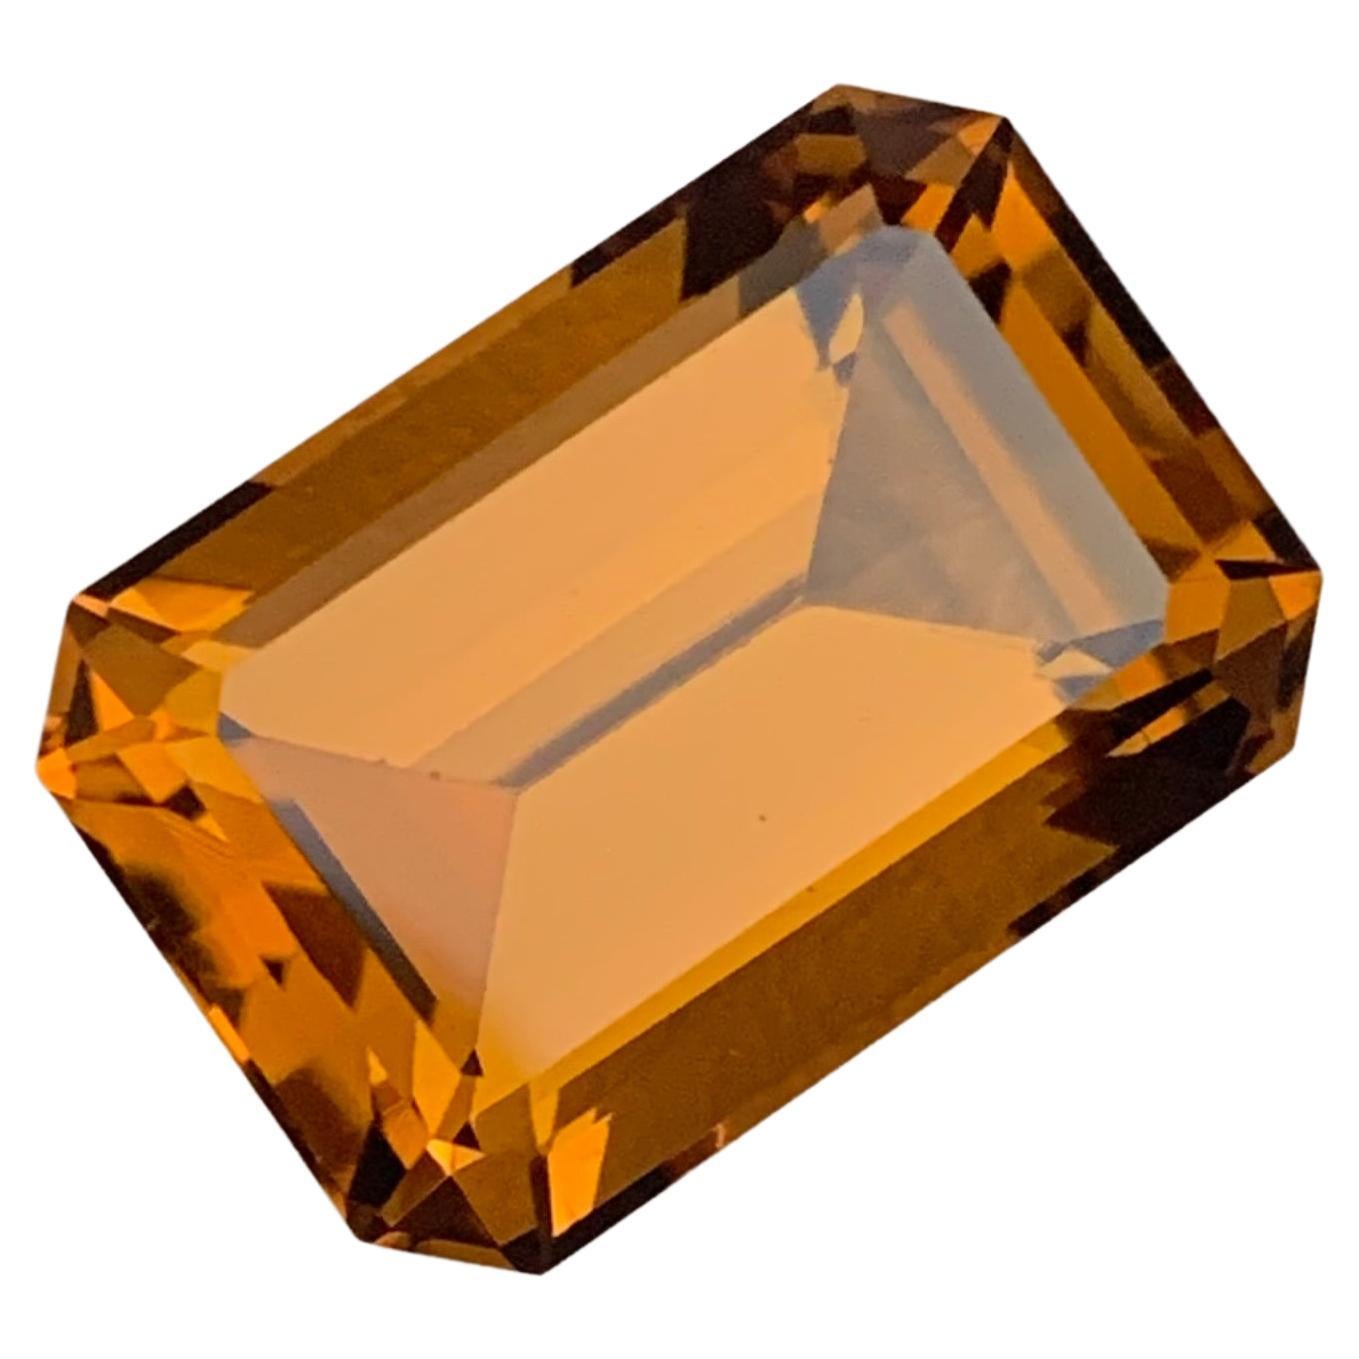 8.55 Carat Emerald Cut Natural Honey Brown Citrine from Brazil for Jewelry